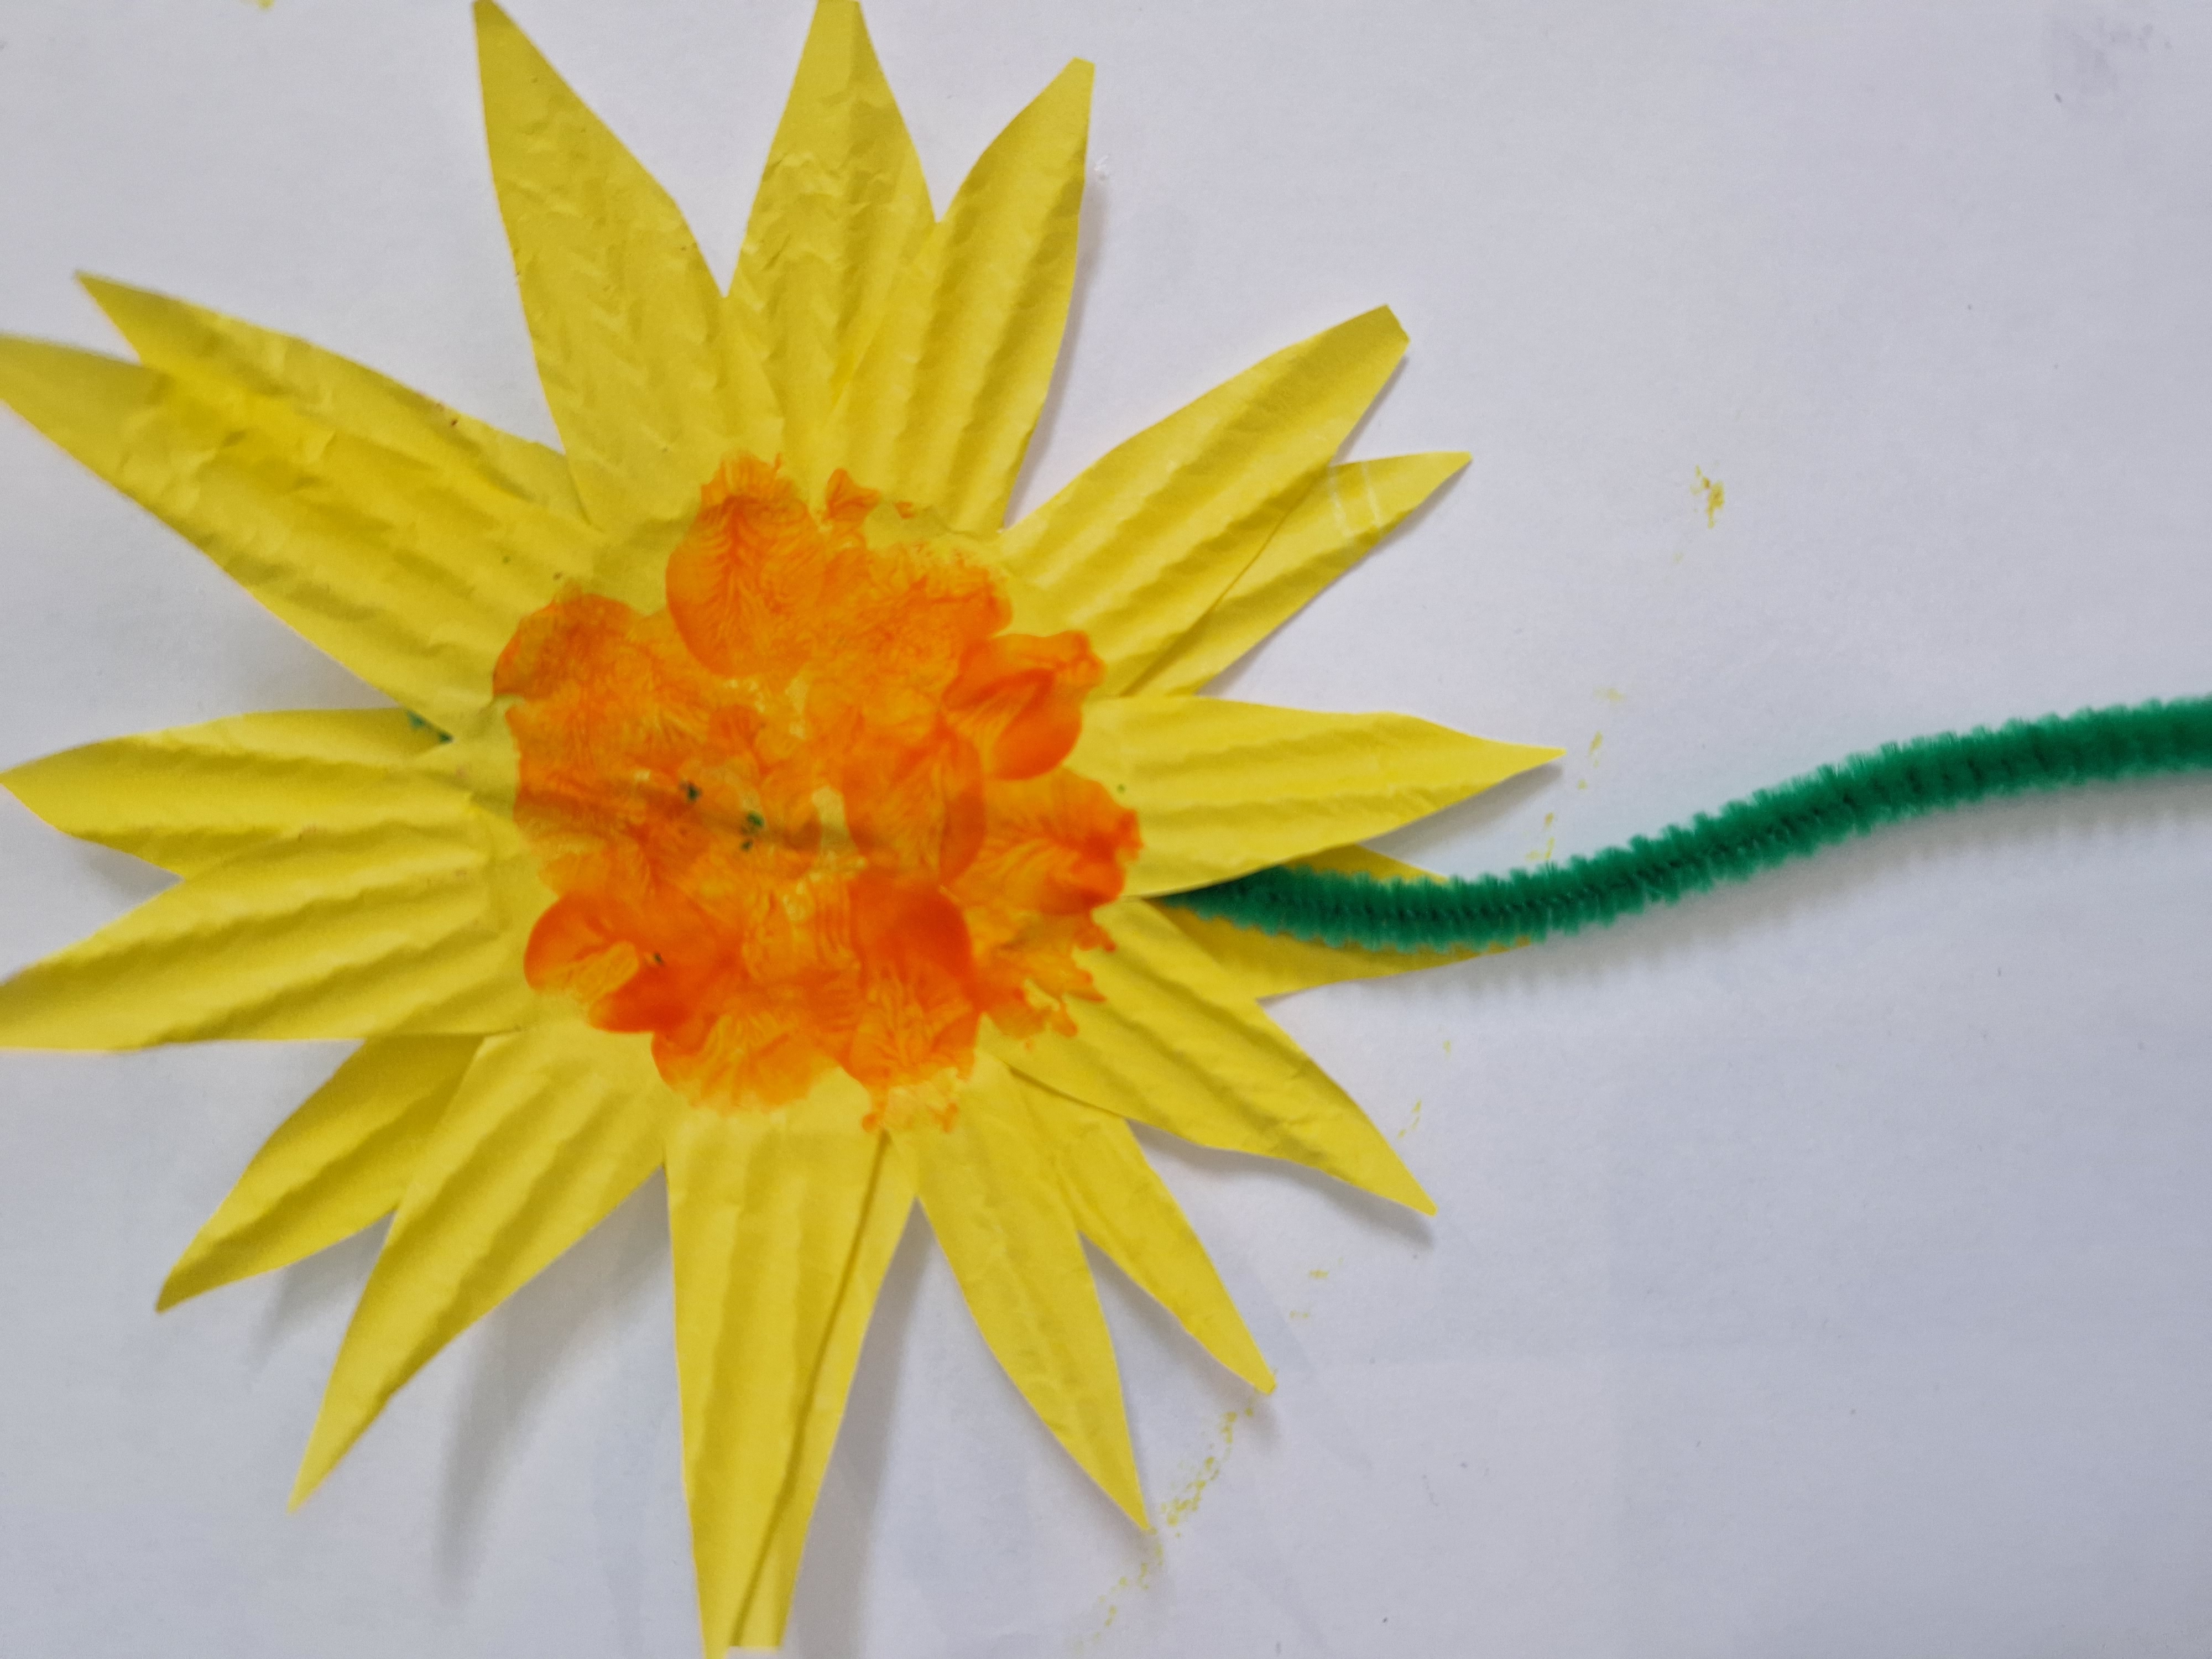 Sunflowers using yellow cupcake cases and green pipe cleaners